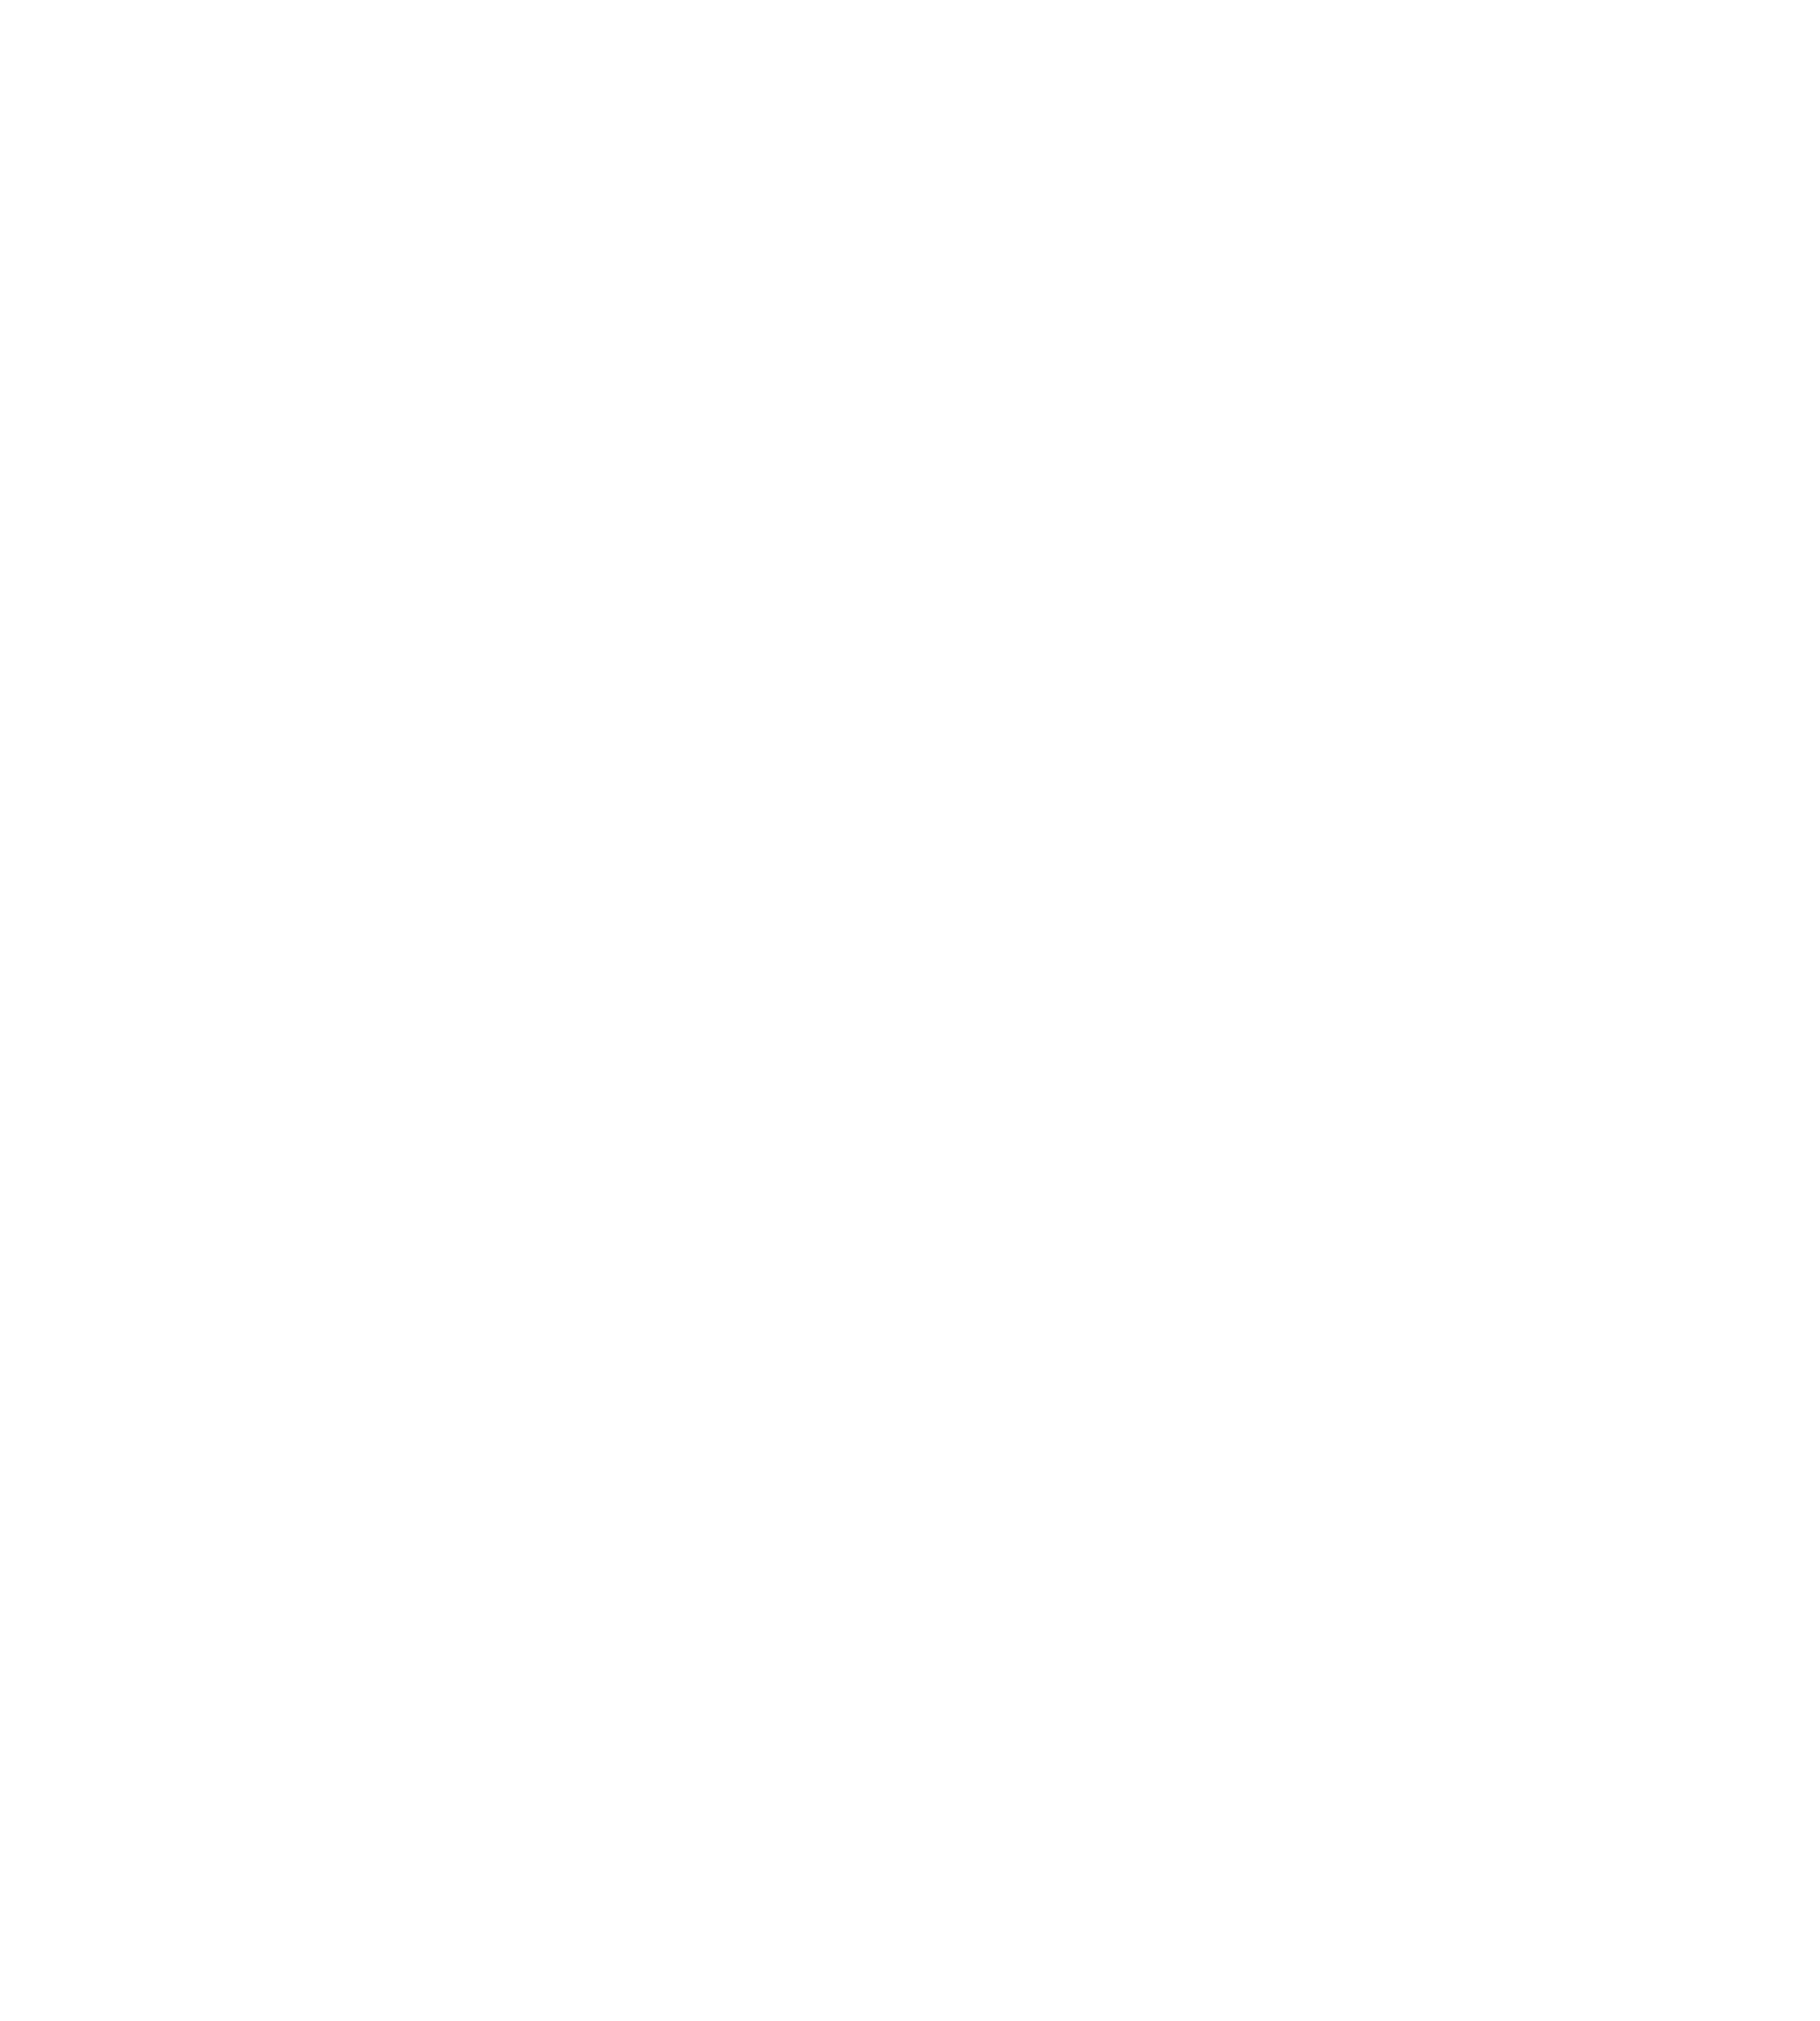 Wings Insights